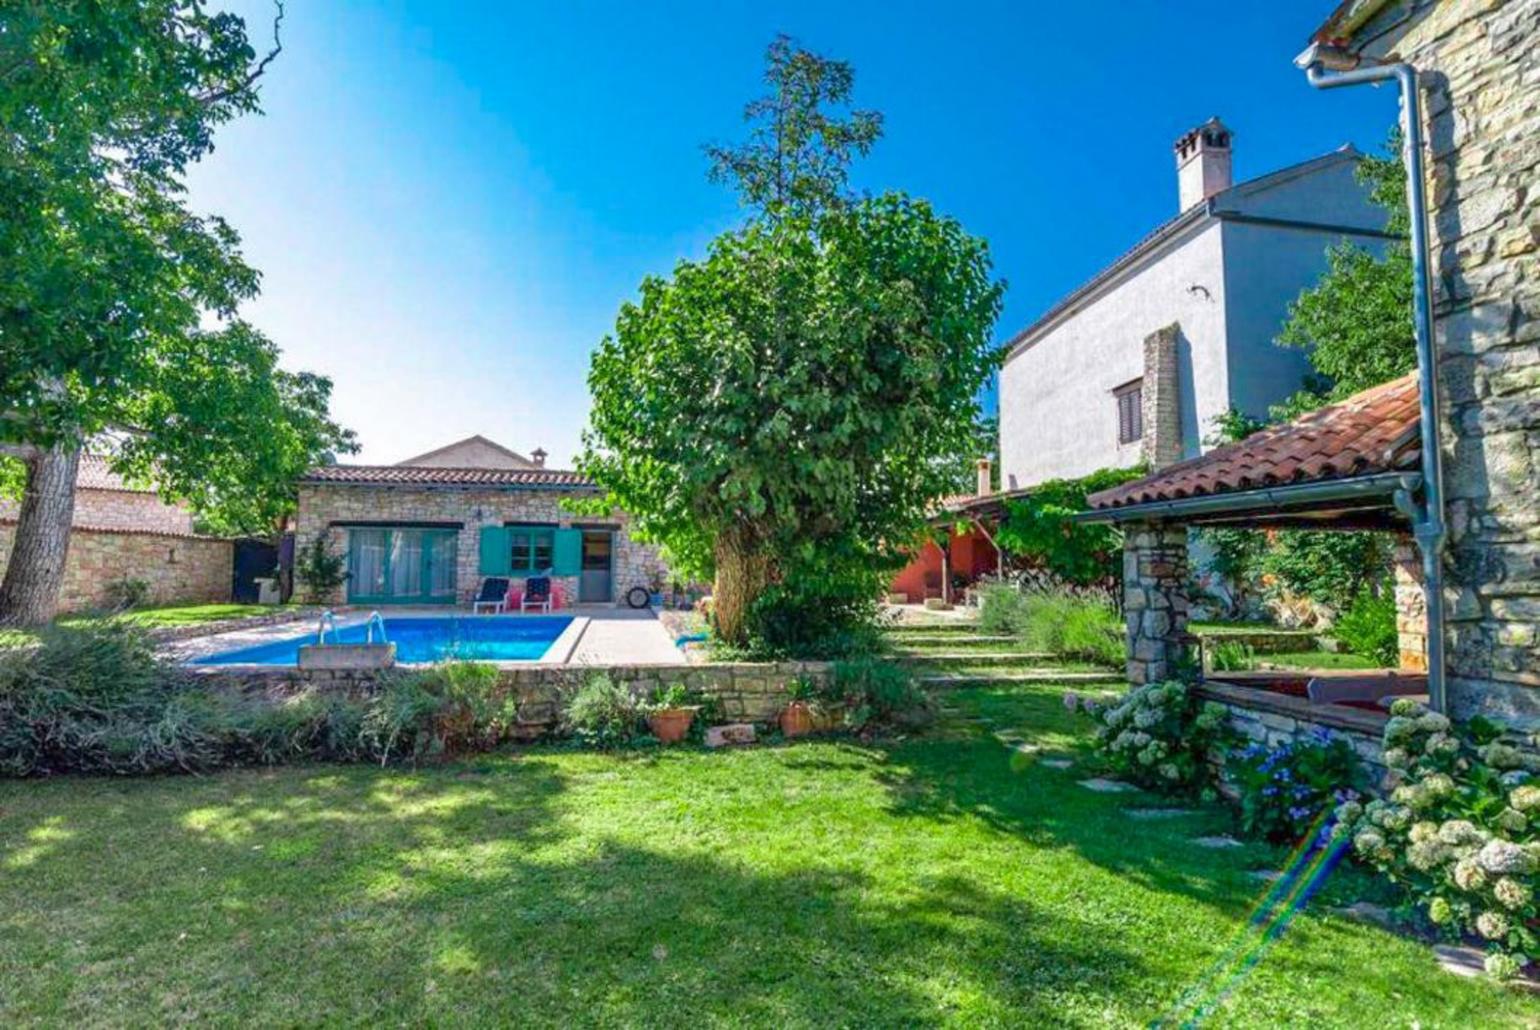 Beautiful villa with private pool, terrace, and garden area